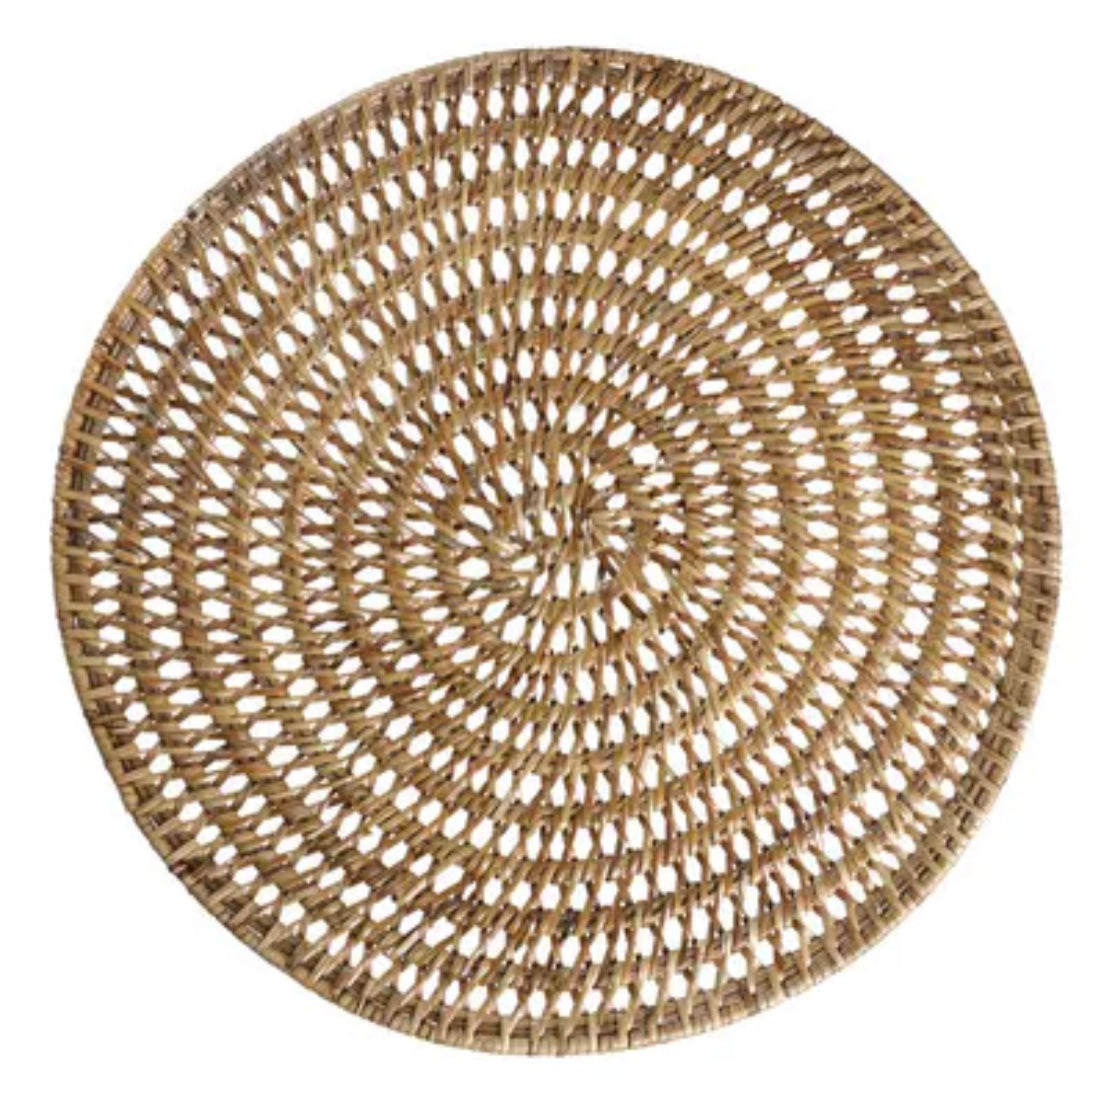 Set of 12 Handwoven Round Rattan Placemats